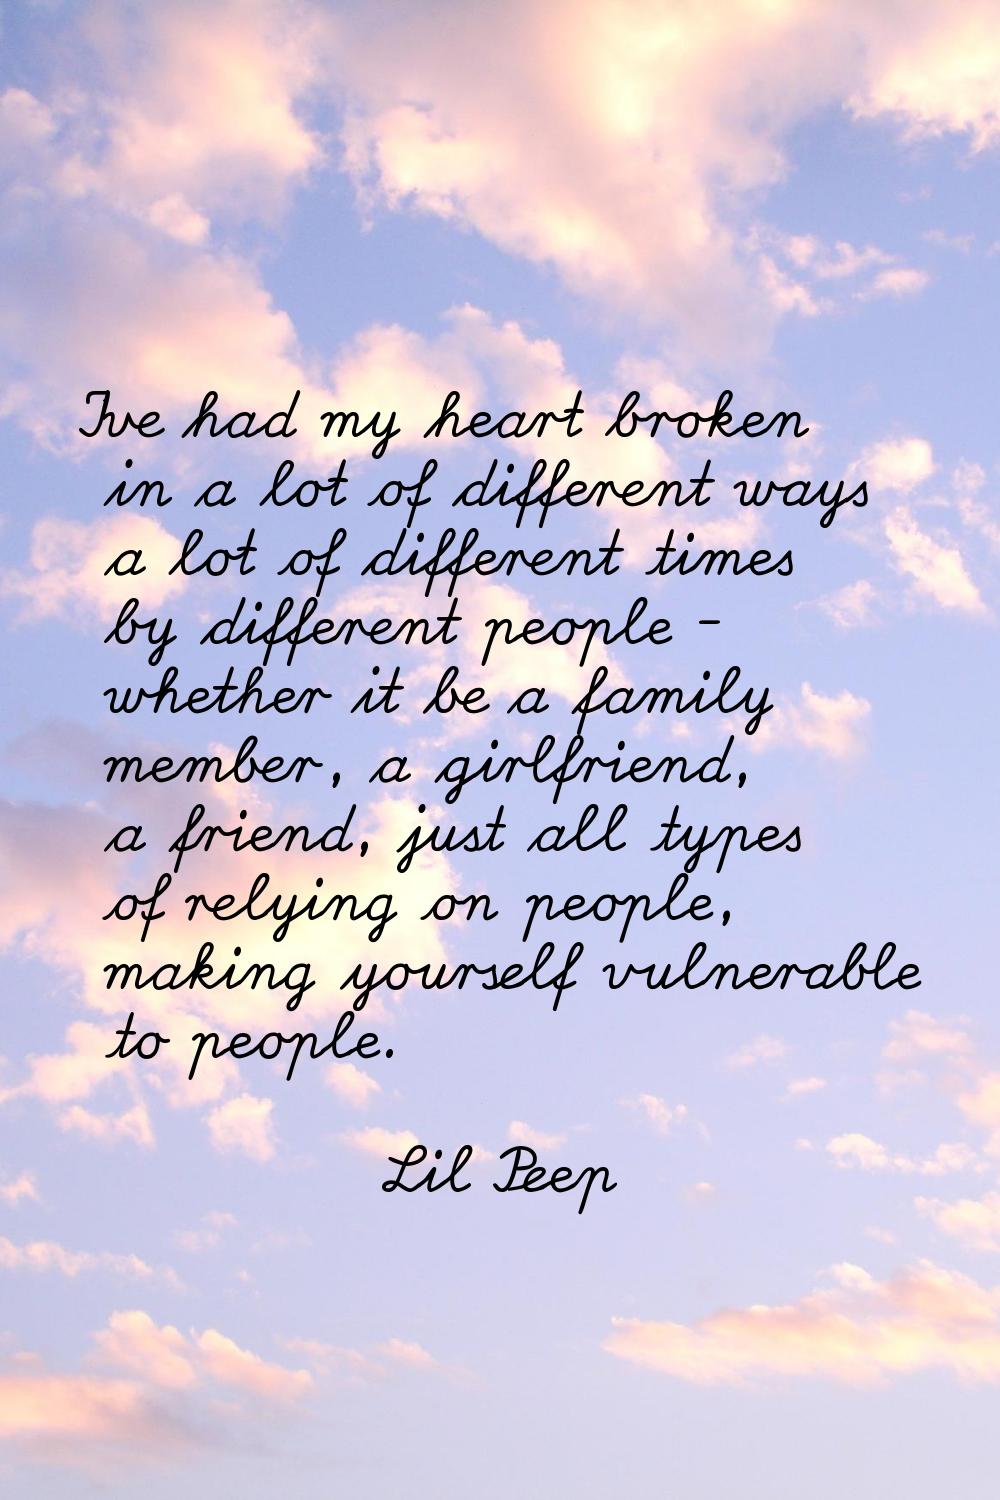 I've had my heart broken in a lot of different ways a lot of different times by different people - 